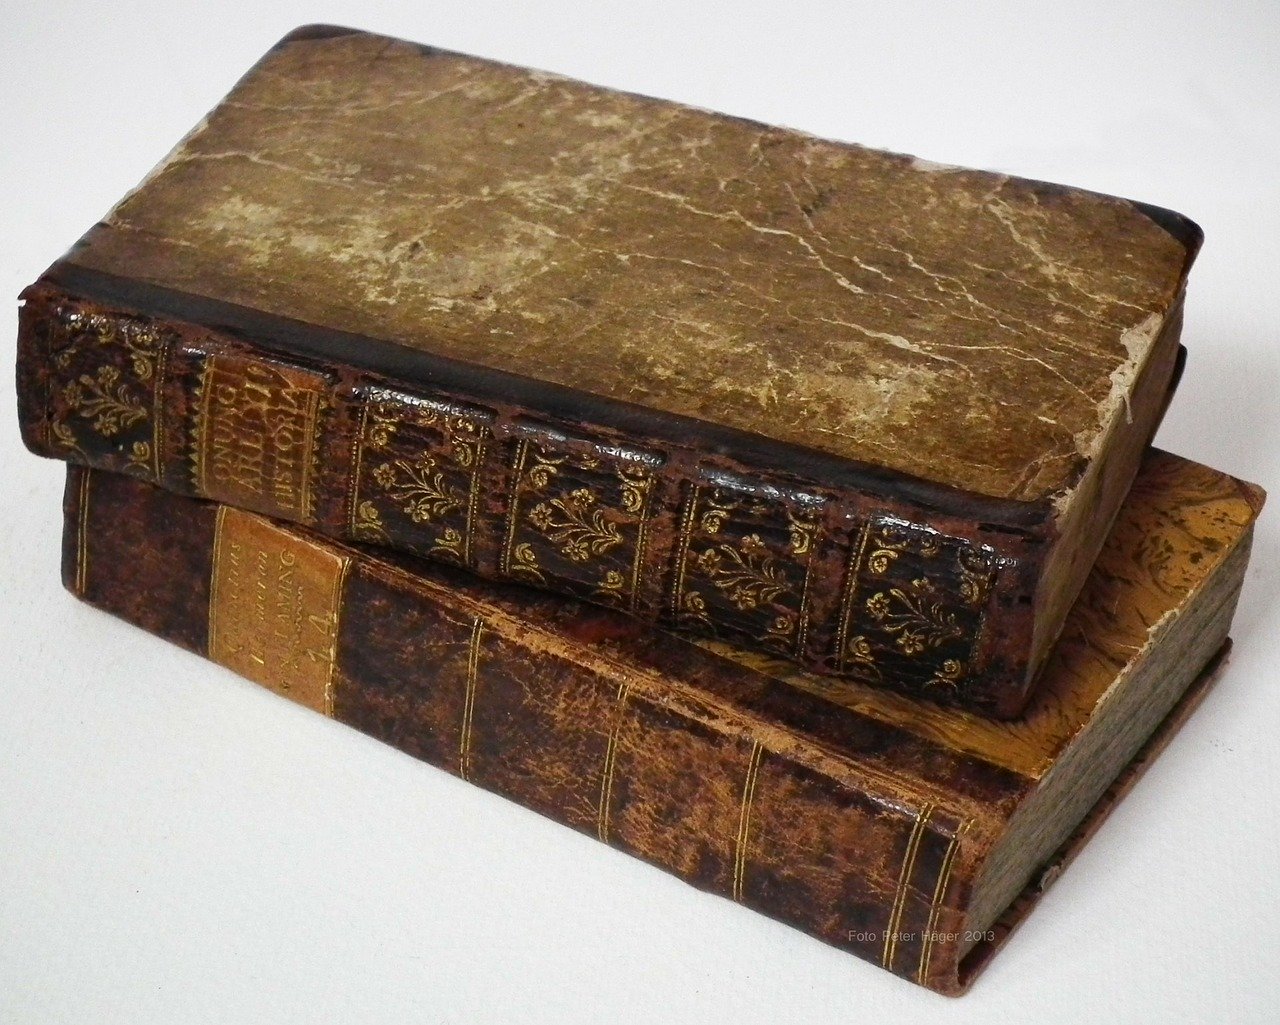 Value of a Rare Chinese Book - Rare Book Buyer.com - We Buy Old and Rare  Books, Libraries, and Entire Estates. Immediate PaymentRare Book Buyer.com  – We Buy Old and Rare Books